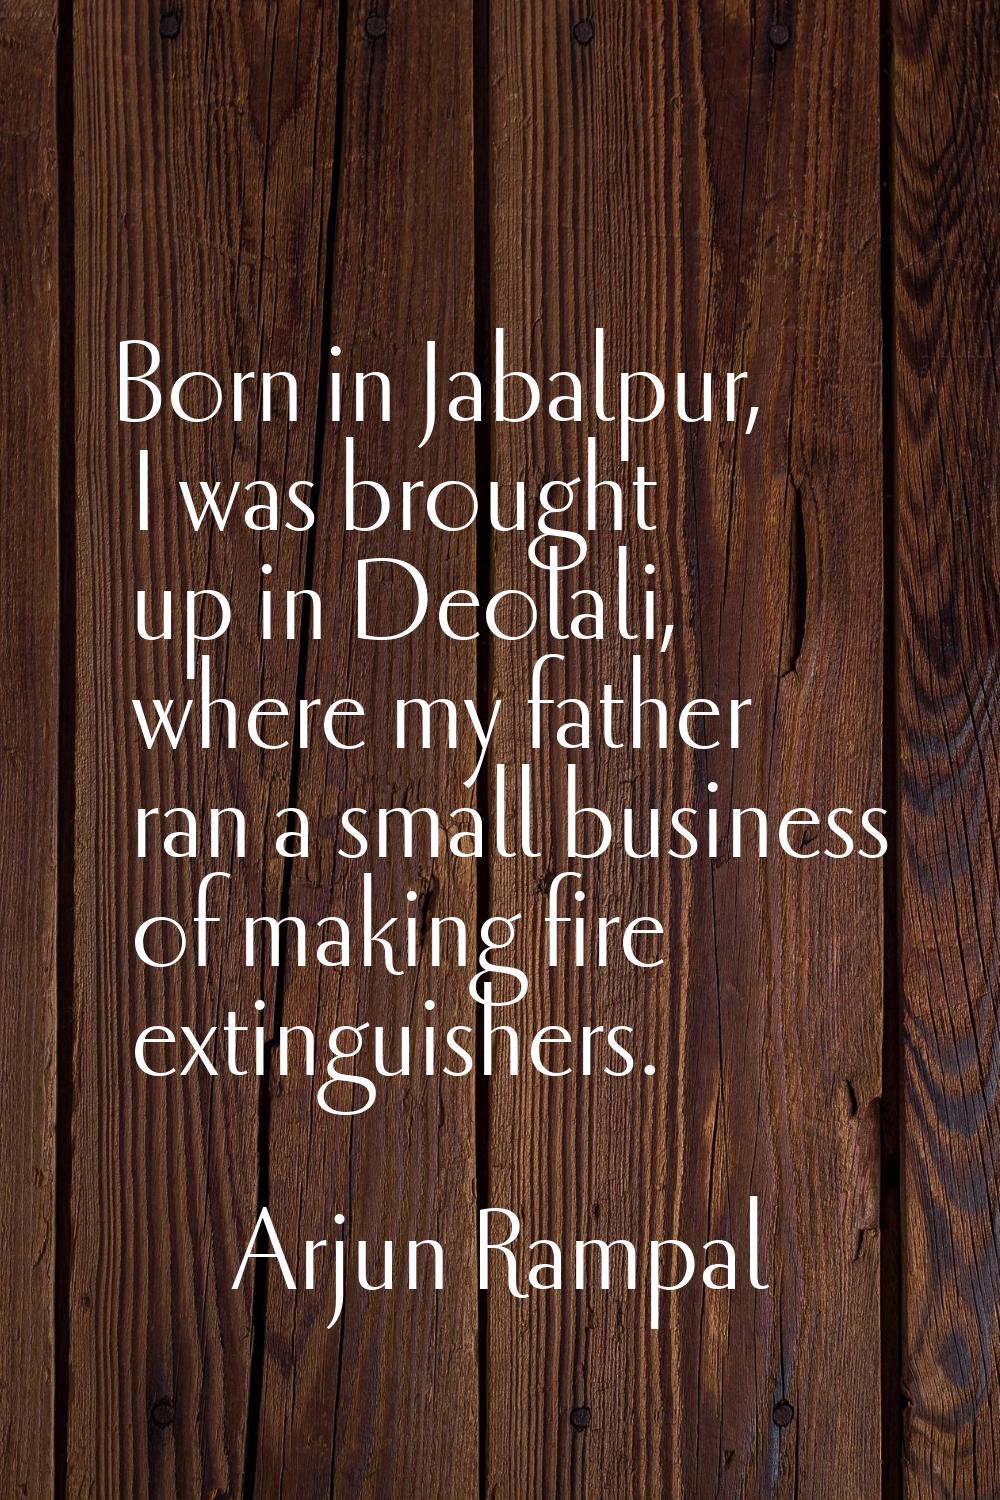 Born in Jabalpur, I was brought up in Deolali, where my father ran a small business of making fire 